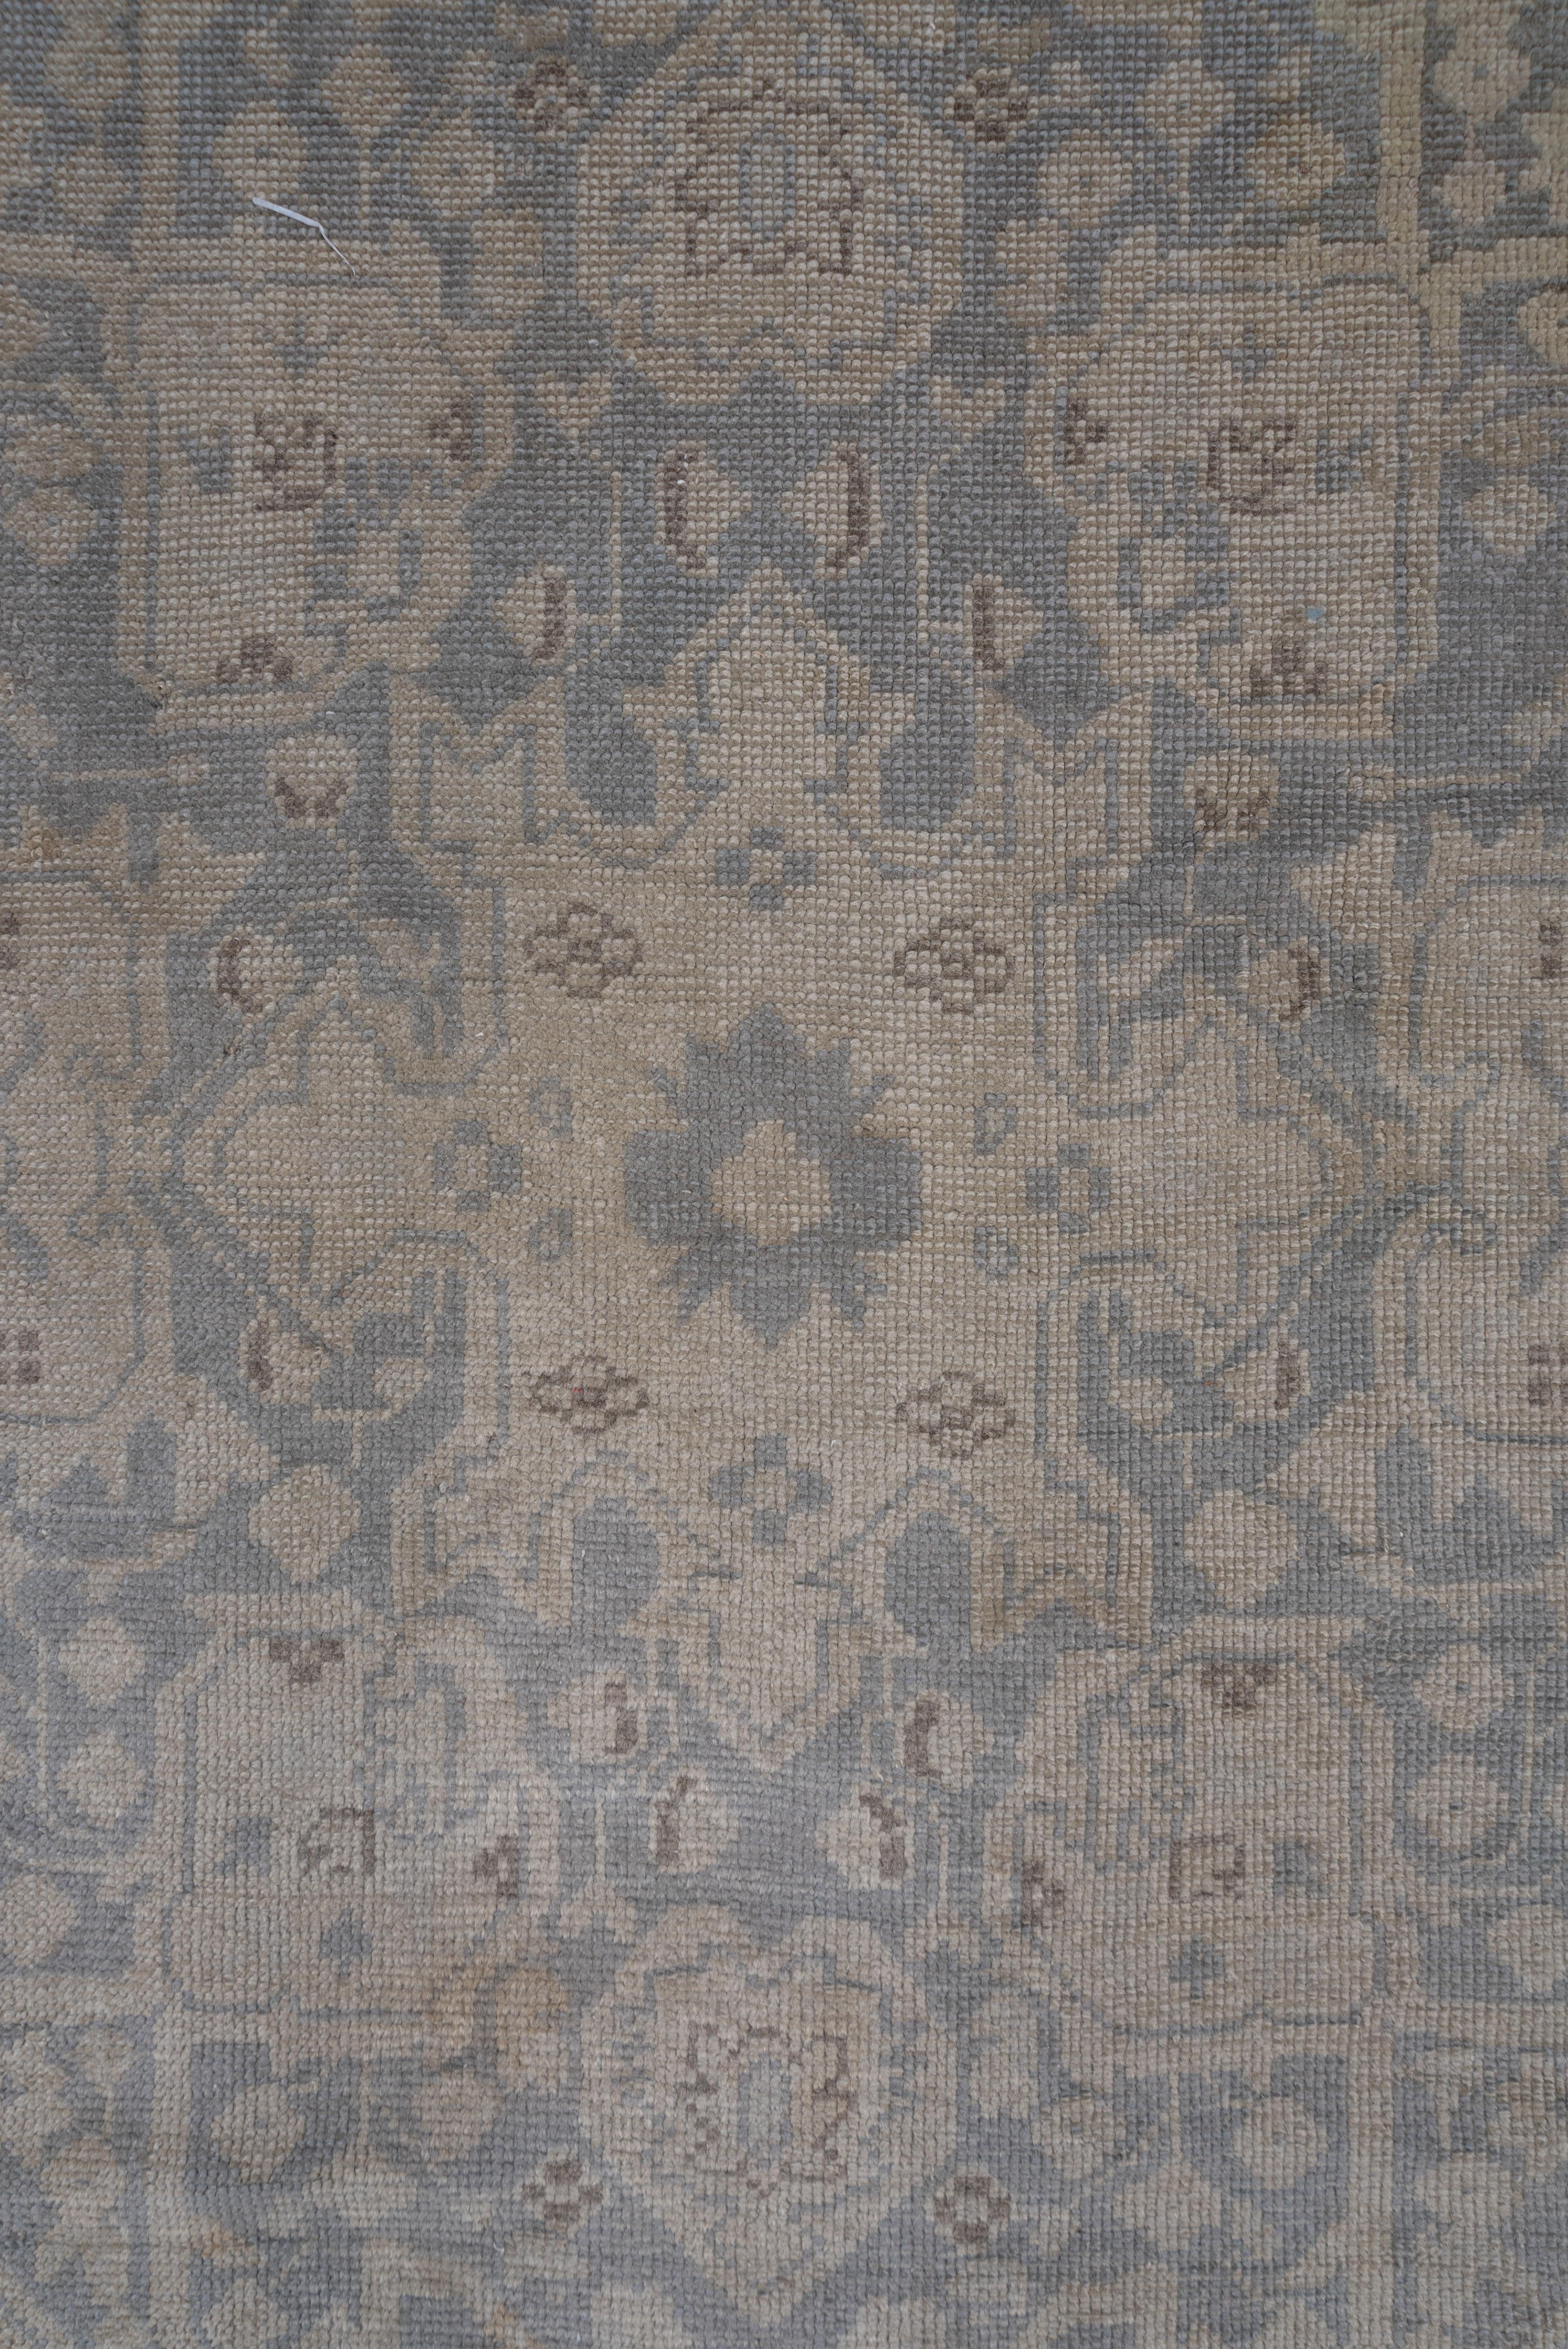 This light colored western Turkish town carpet features a beige open field with a large, slightly scalloped lozenge medallion and arabesque defined corners. The main border shows lollipop flowers, right-angle vines and sketchy turtle palmettes.